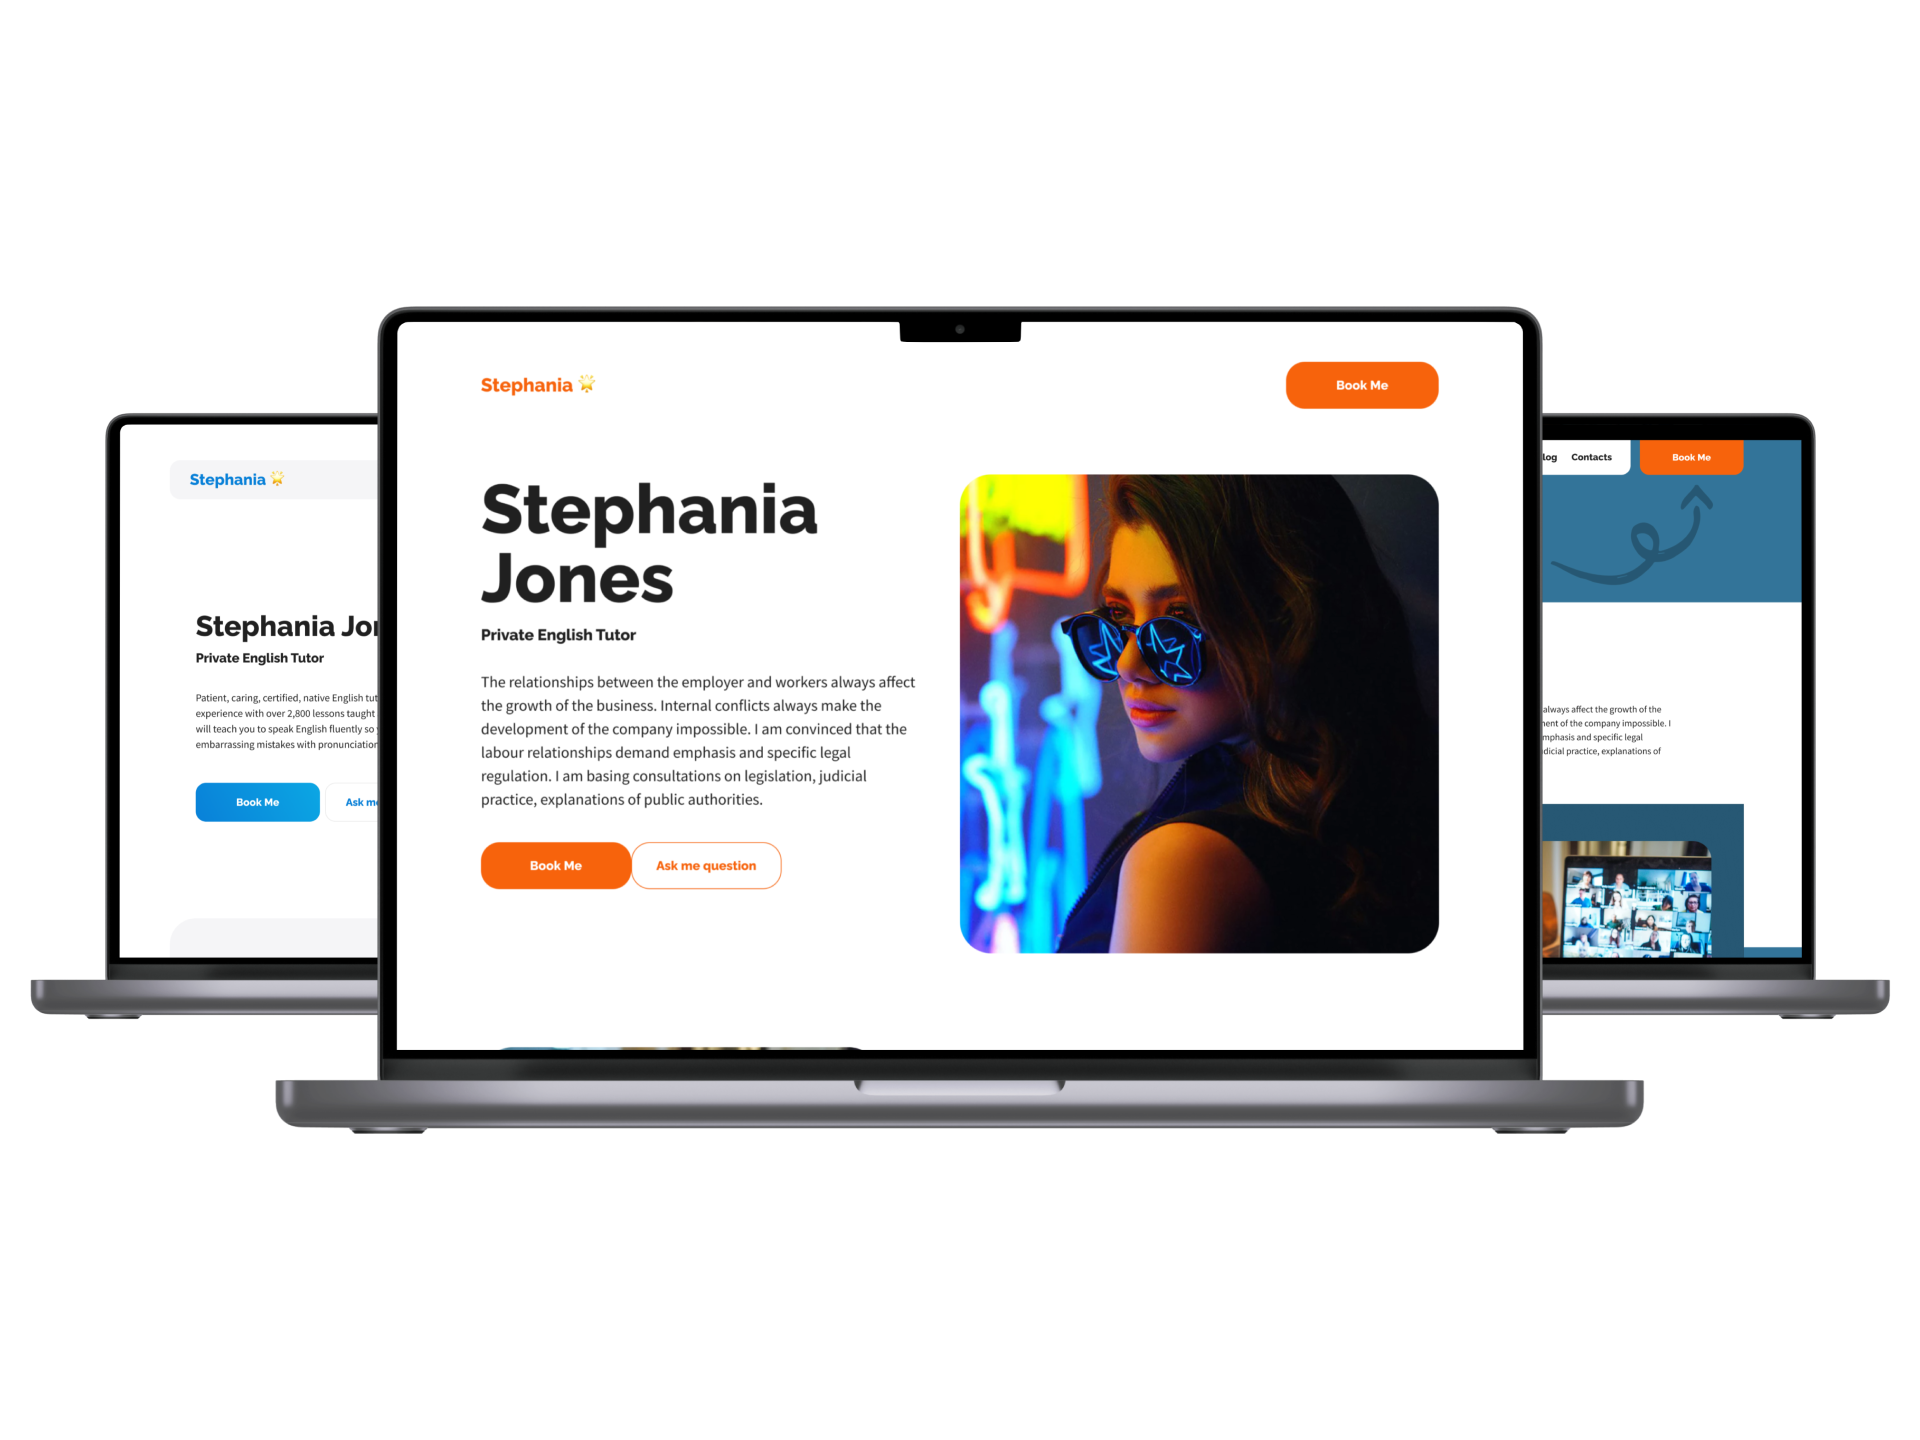 Effortlessly create your personal website in just one click. Choose a professional template, customize it with your photos, contacts, and information, and publish it to showcase your unique online presence.